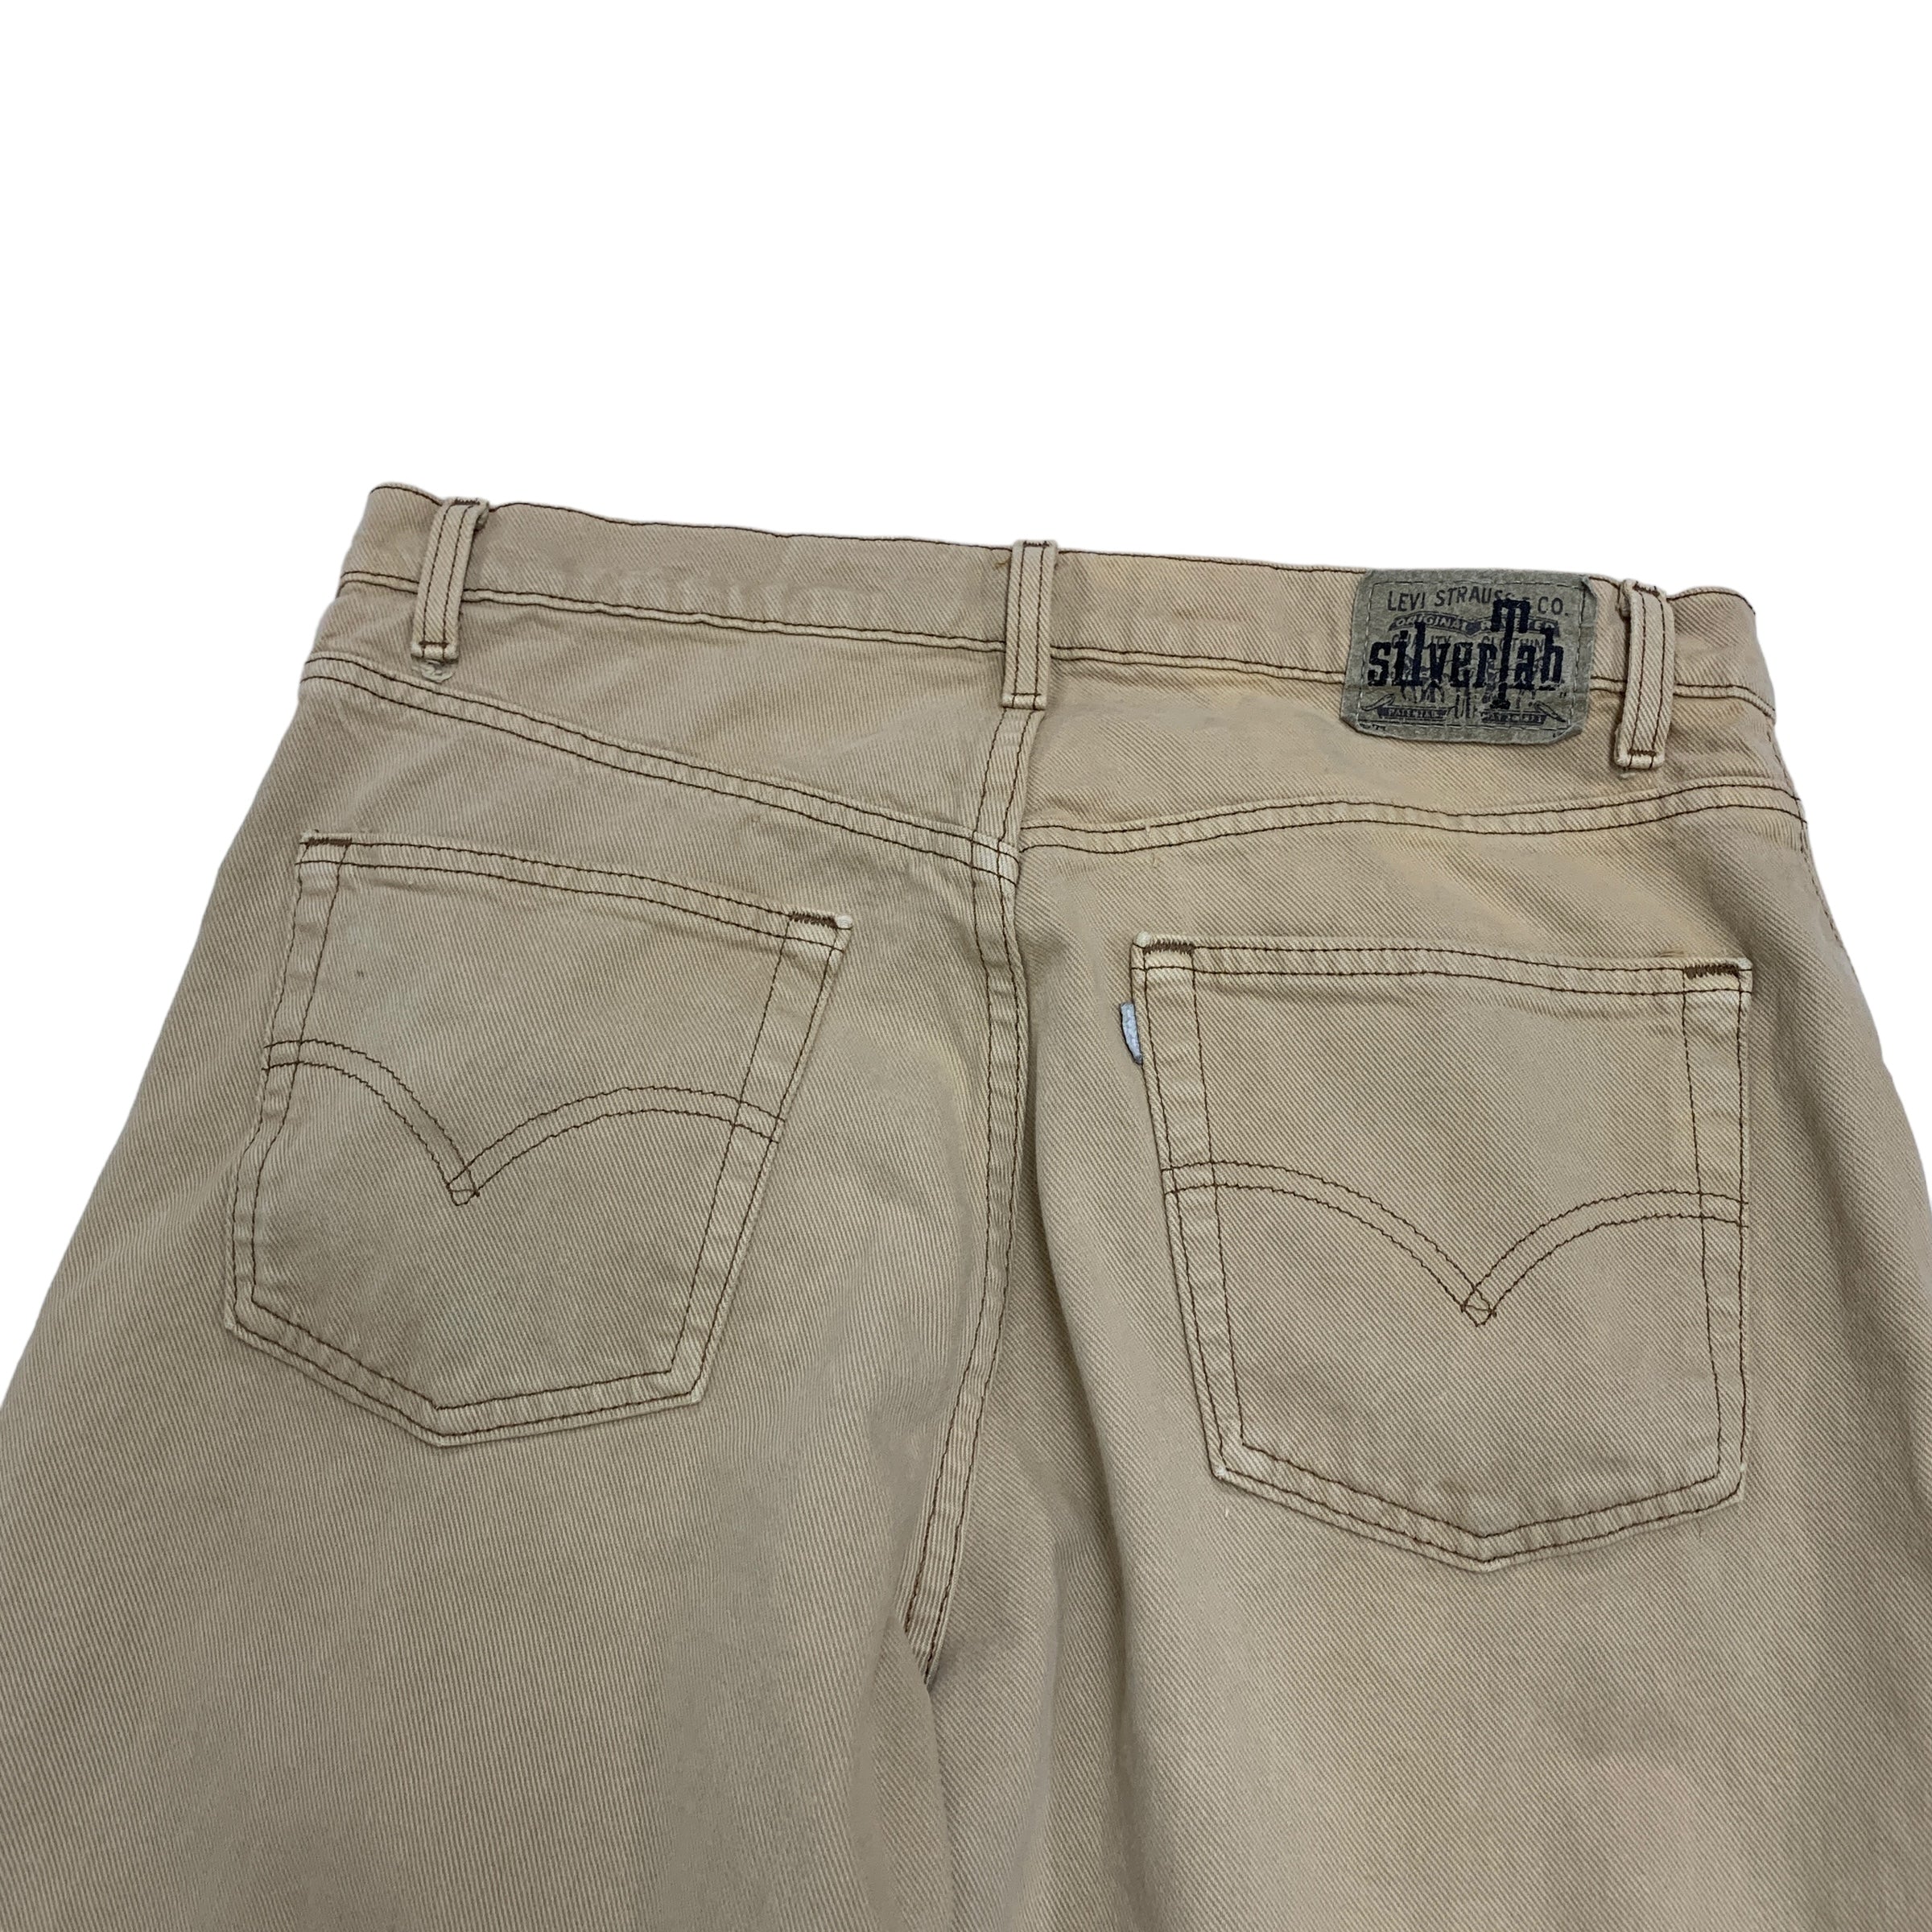 Levis Silvertab Baggy Jeans W36 L34 Mens Beige Vintage Made In USA 90s Denim